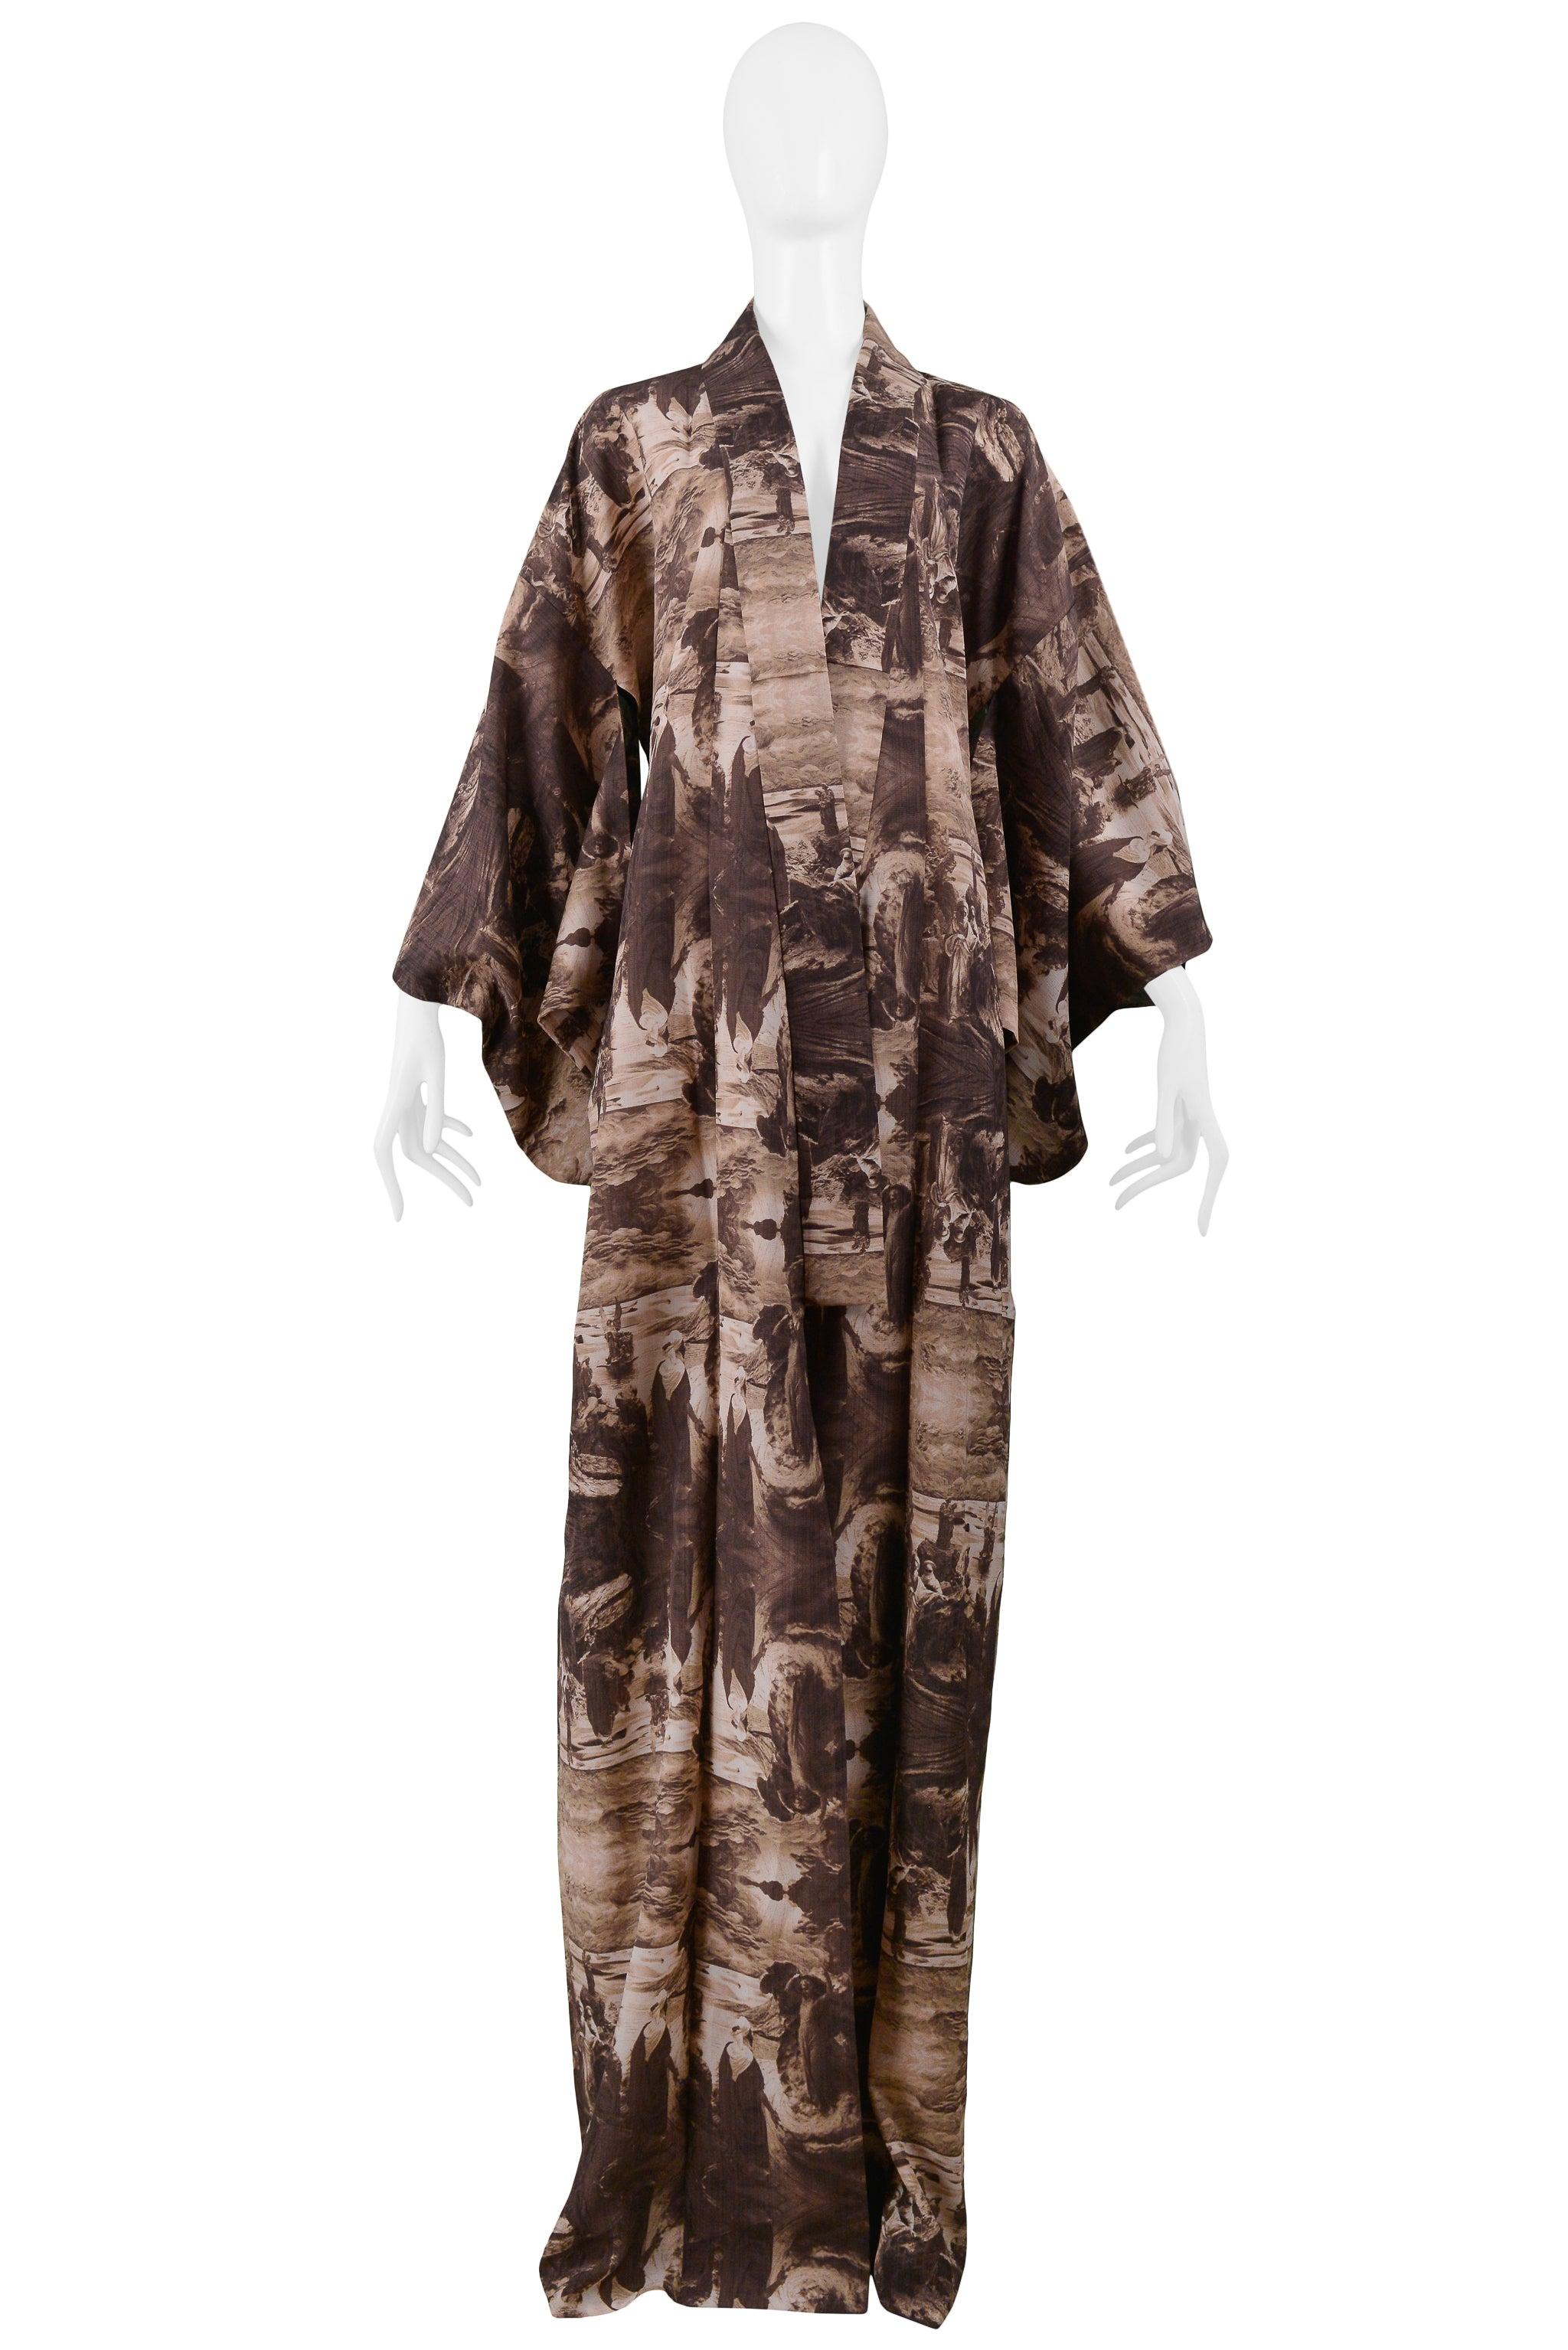 Resurrection Vintage is excited to offer a vintage Jean Paul Gaultier cotton Yukata robe featuring a photographic sepia brown impressionistic biblical print. The textile design and palette were a personal design project by Jean Paul Gaultier and the